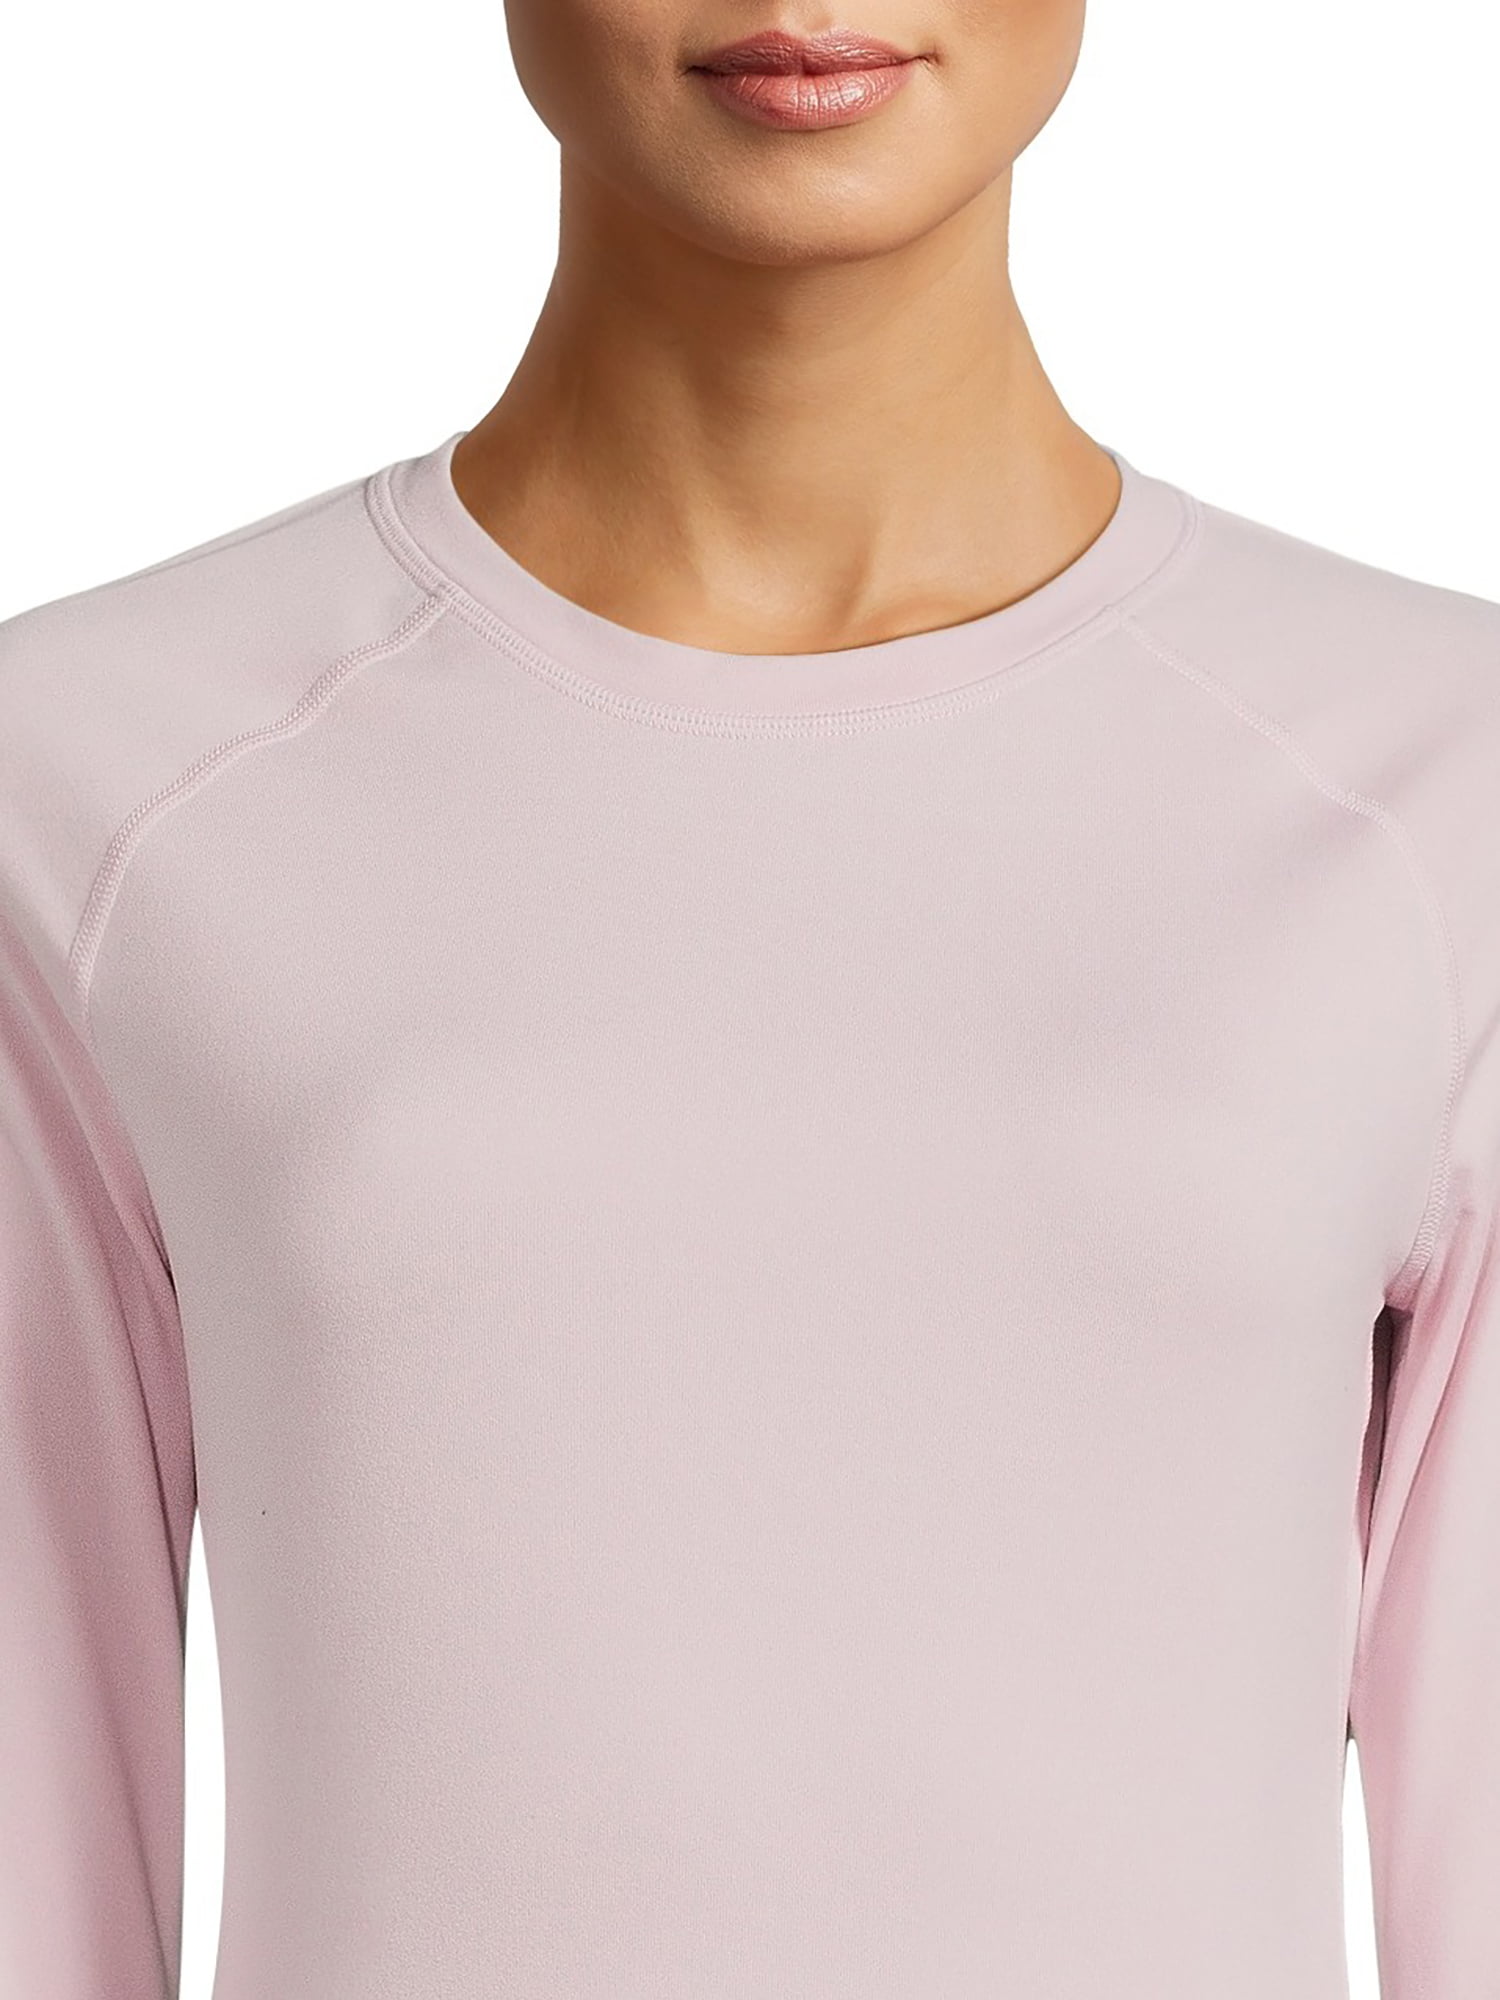 ClimateRight by Cuddl Duds Women's Base Layer Jersey Thermal Top